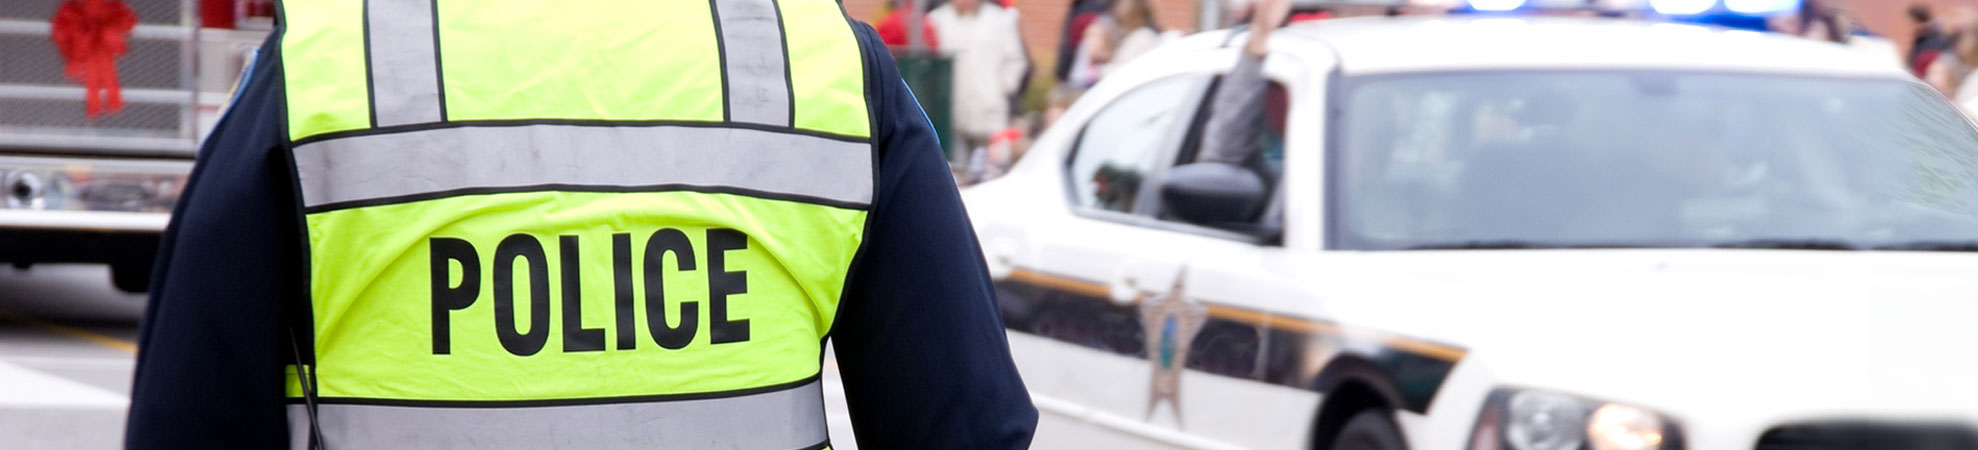 A police officer wearing a high-visibility vest with 